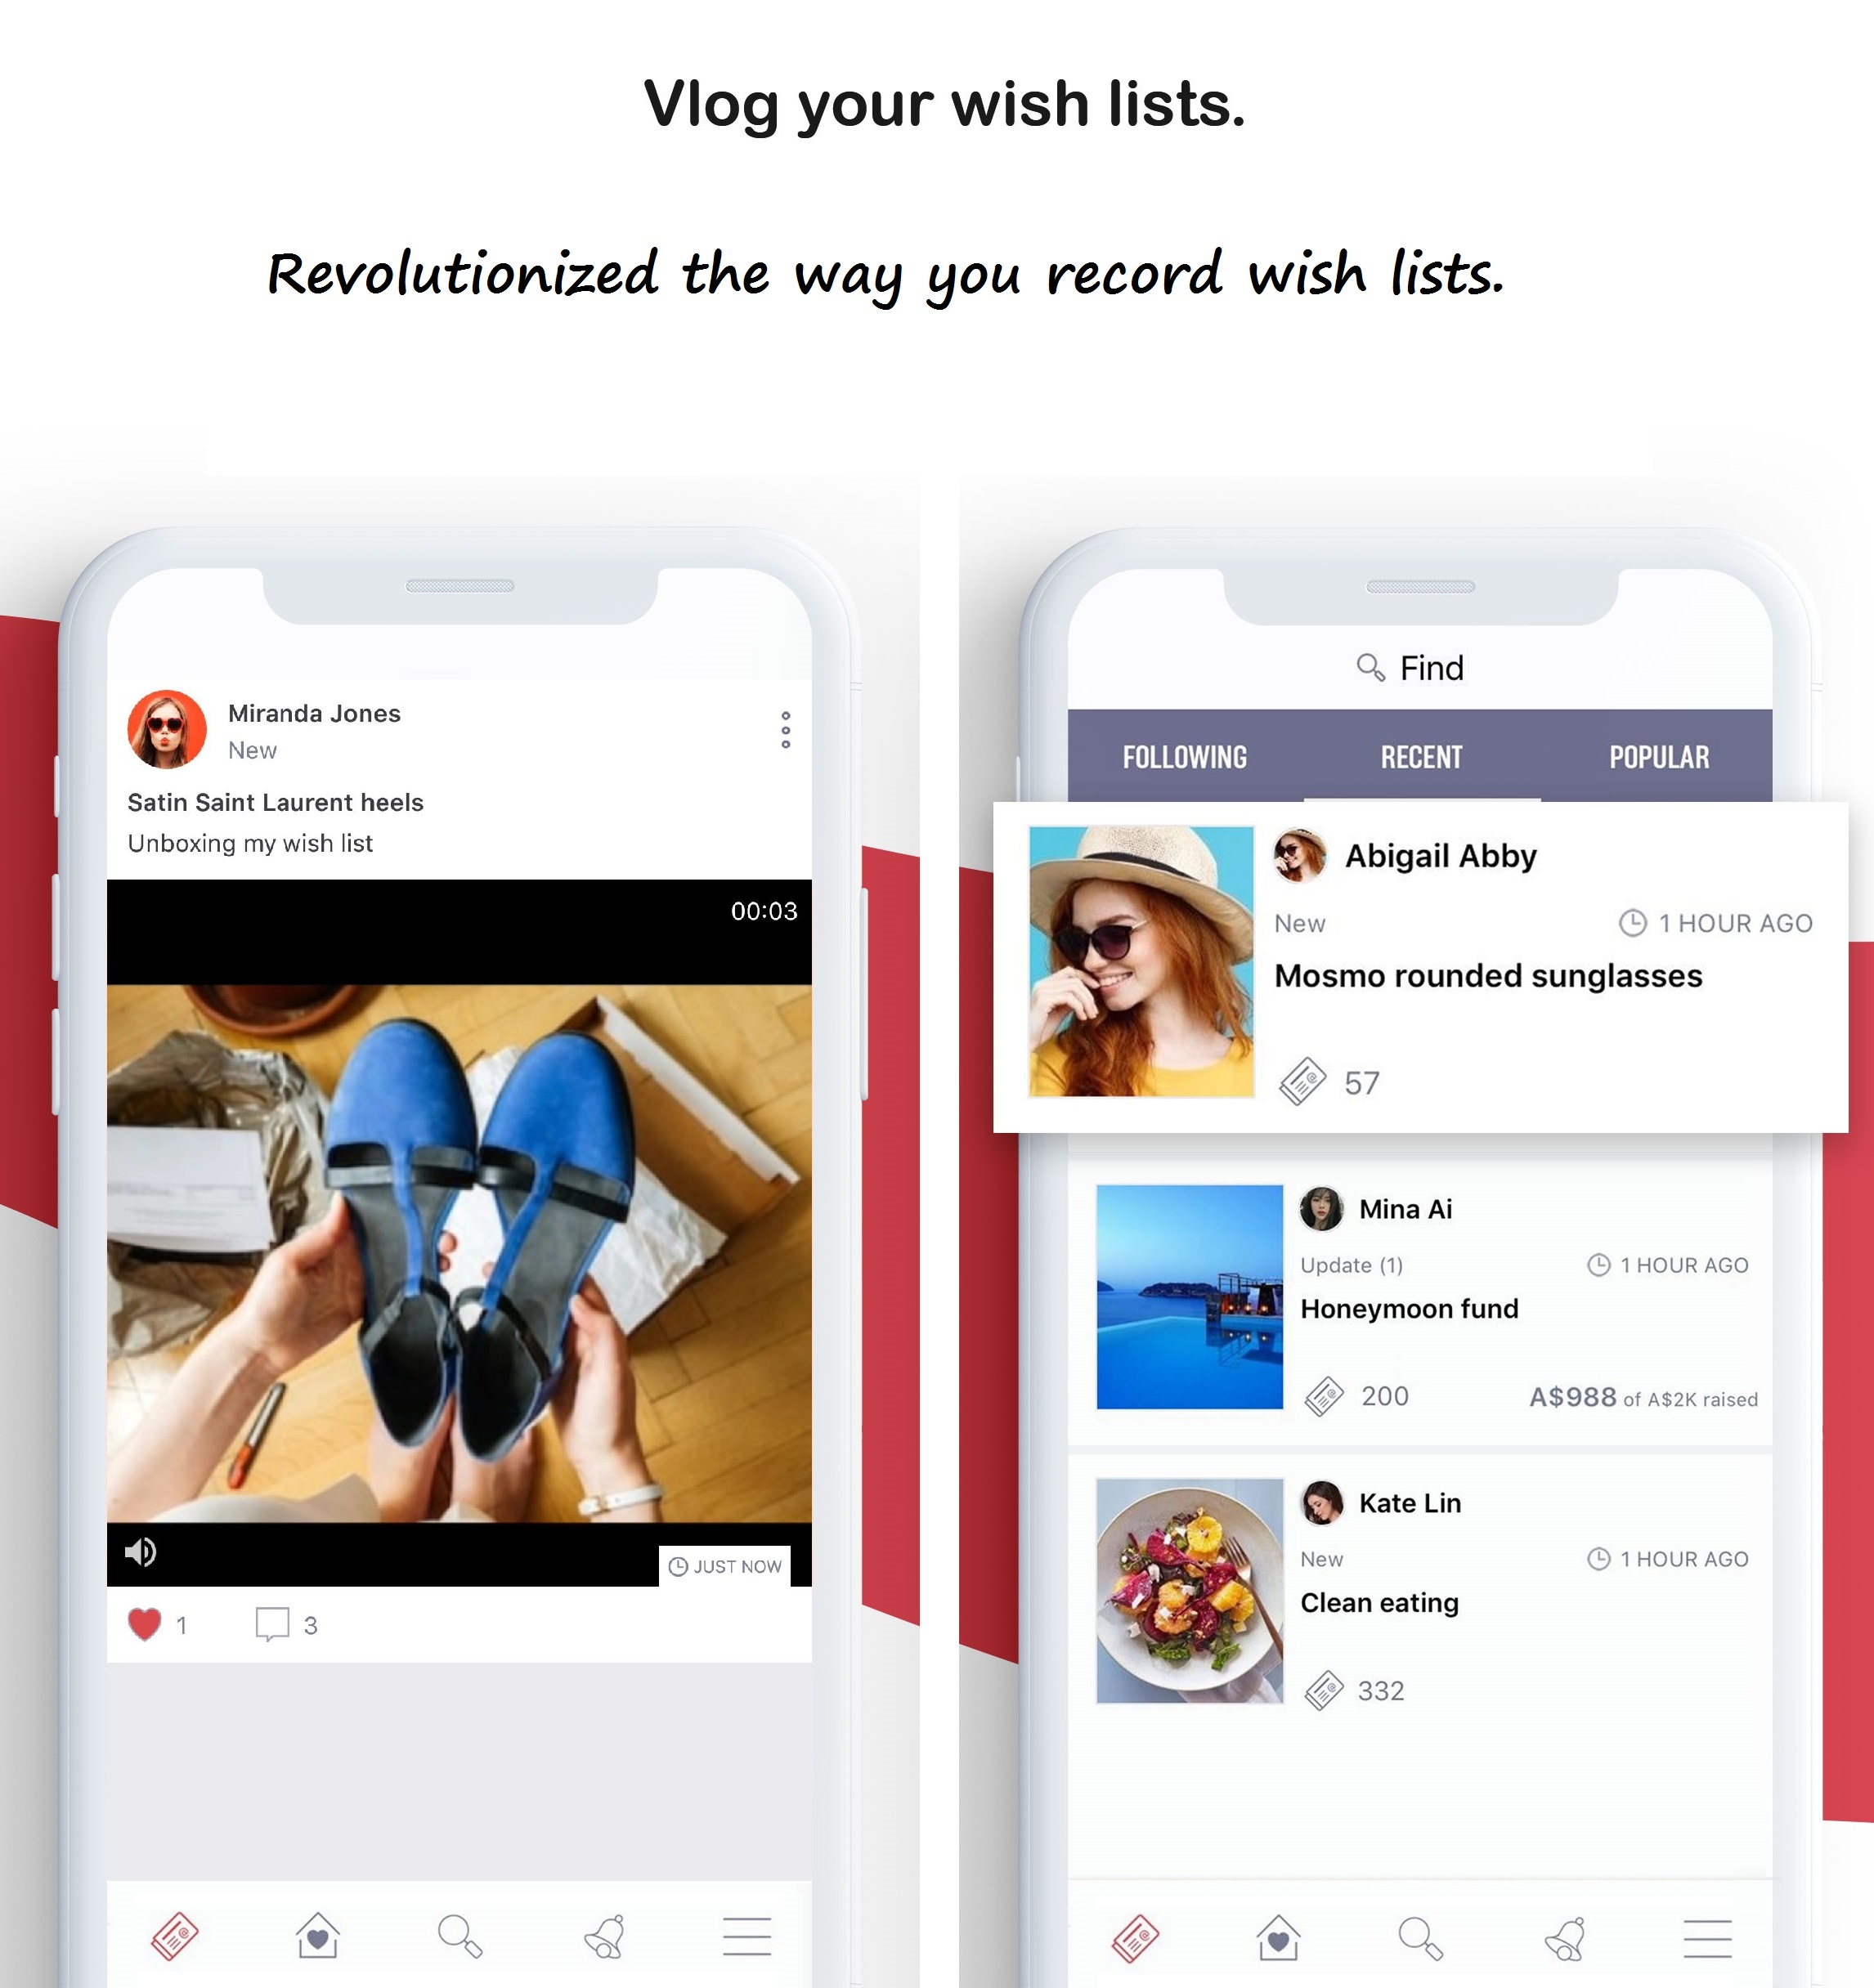 Social Wish List Sharing Platform WishSprout Rolls Out Video Sharing Functionality just in time for Holiday Season